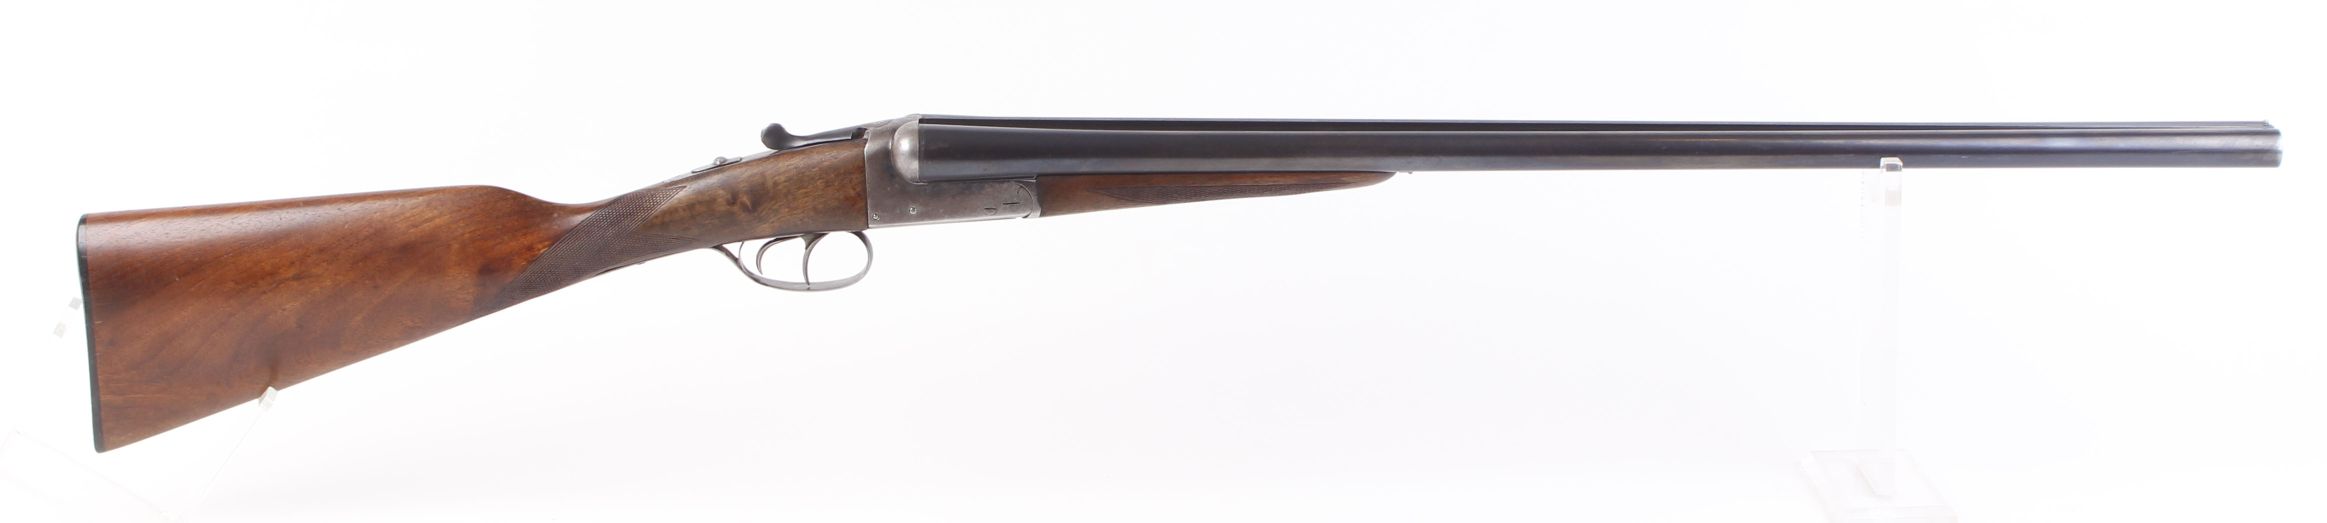 (S2) 12 bore boxlock non ejector by AYA, 28 ins barrels, ½ & full, 70mm chambers, plain action,